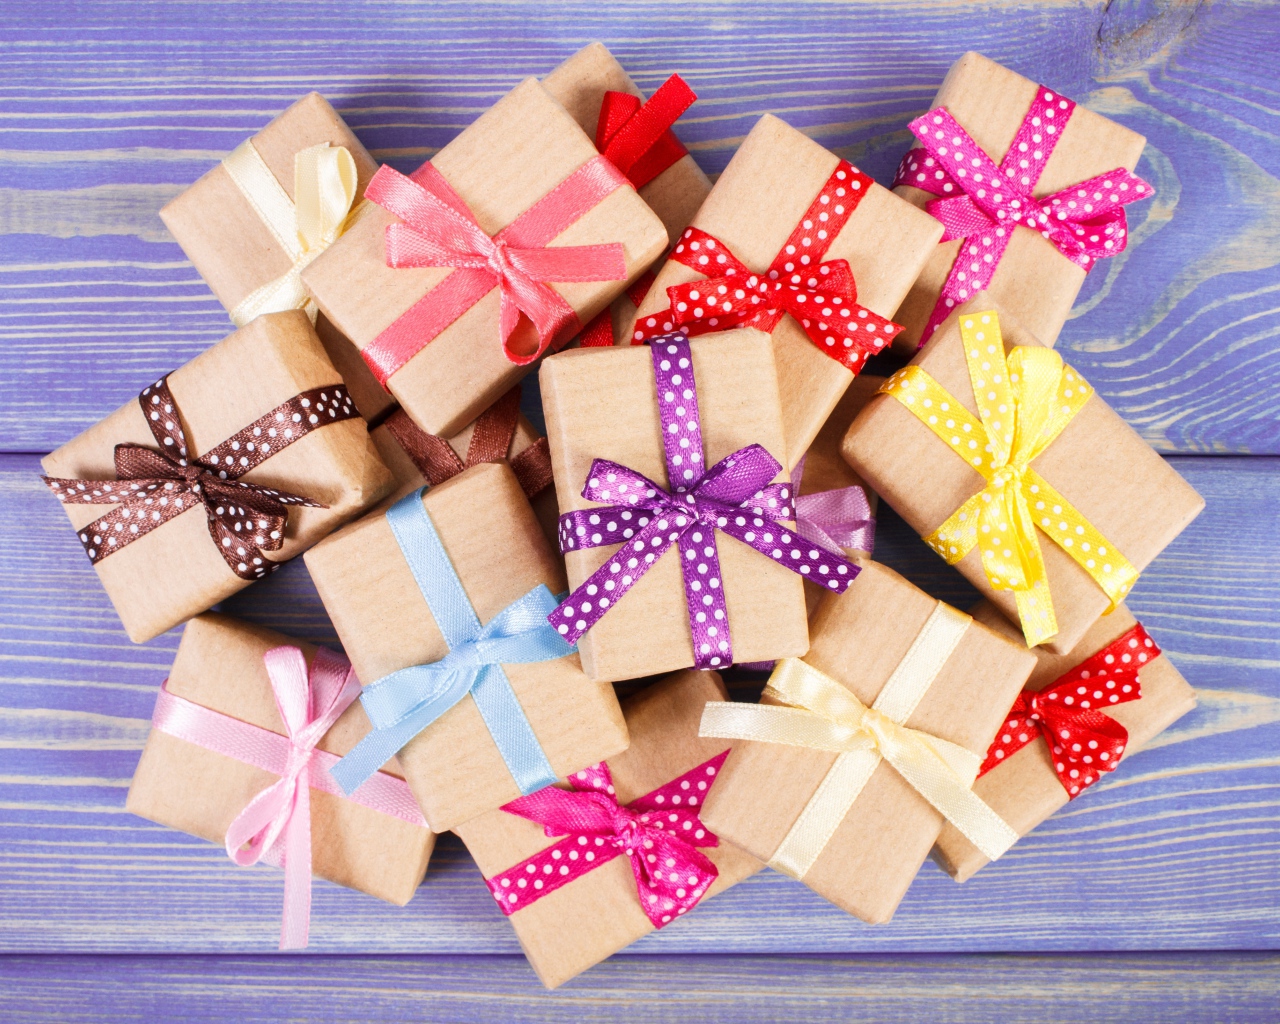 Gift boxes with multi-colored ribbons